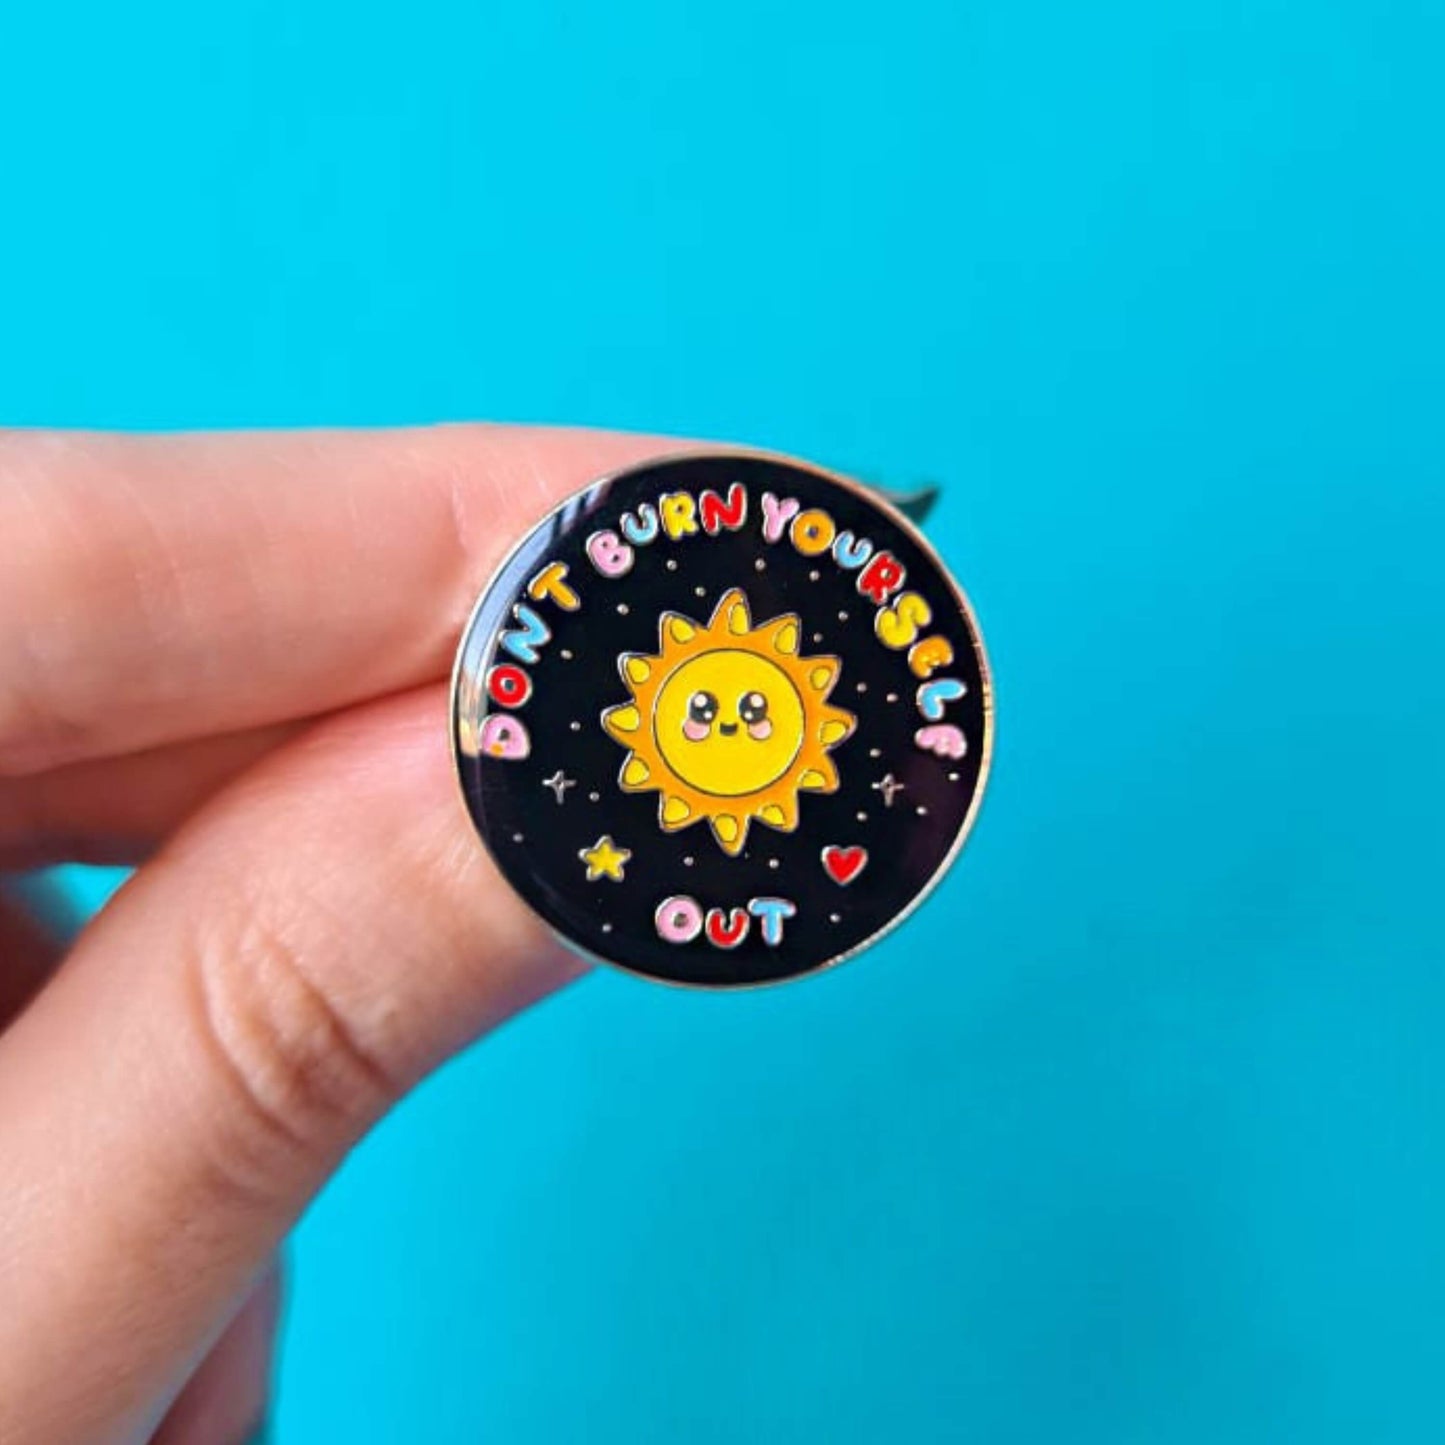 The Don't Burn Yourself Out Sunshine Enamel Pin being held over a blue background. The circle shaped pin badge is a black base with a yellow smiling sunshine in the centre with rainbow text surrounding it reading 'don't burn yourself out' along with a red heart, yellow star and silver sparkles. The design was created as a gentle reminder to practise self care.